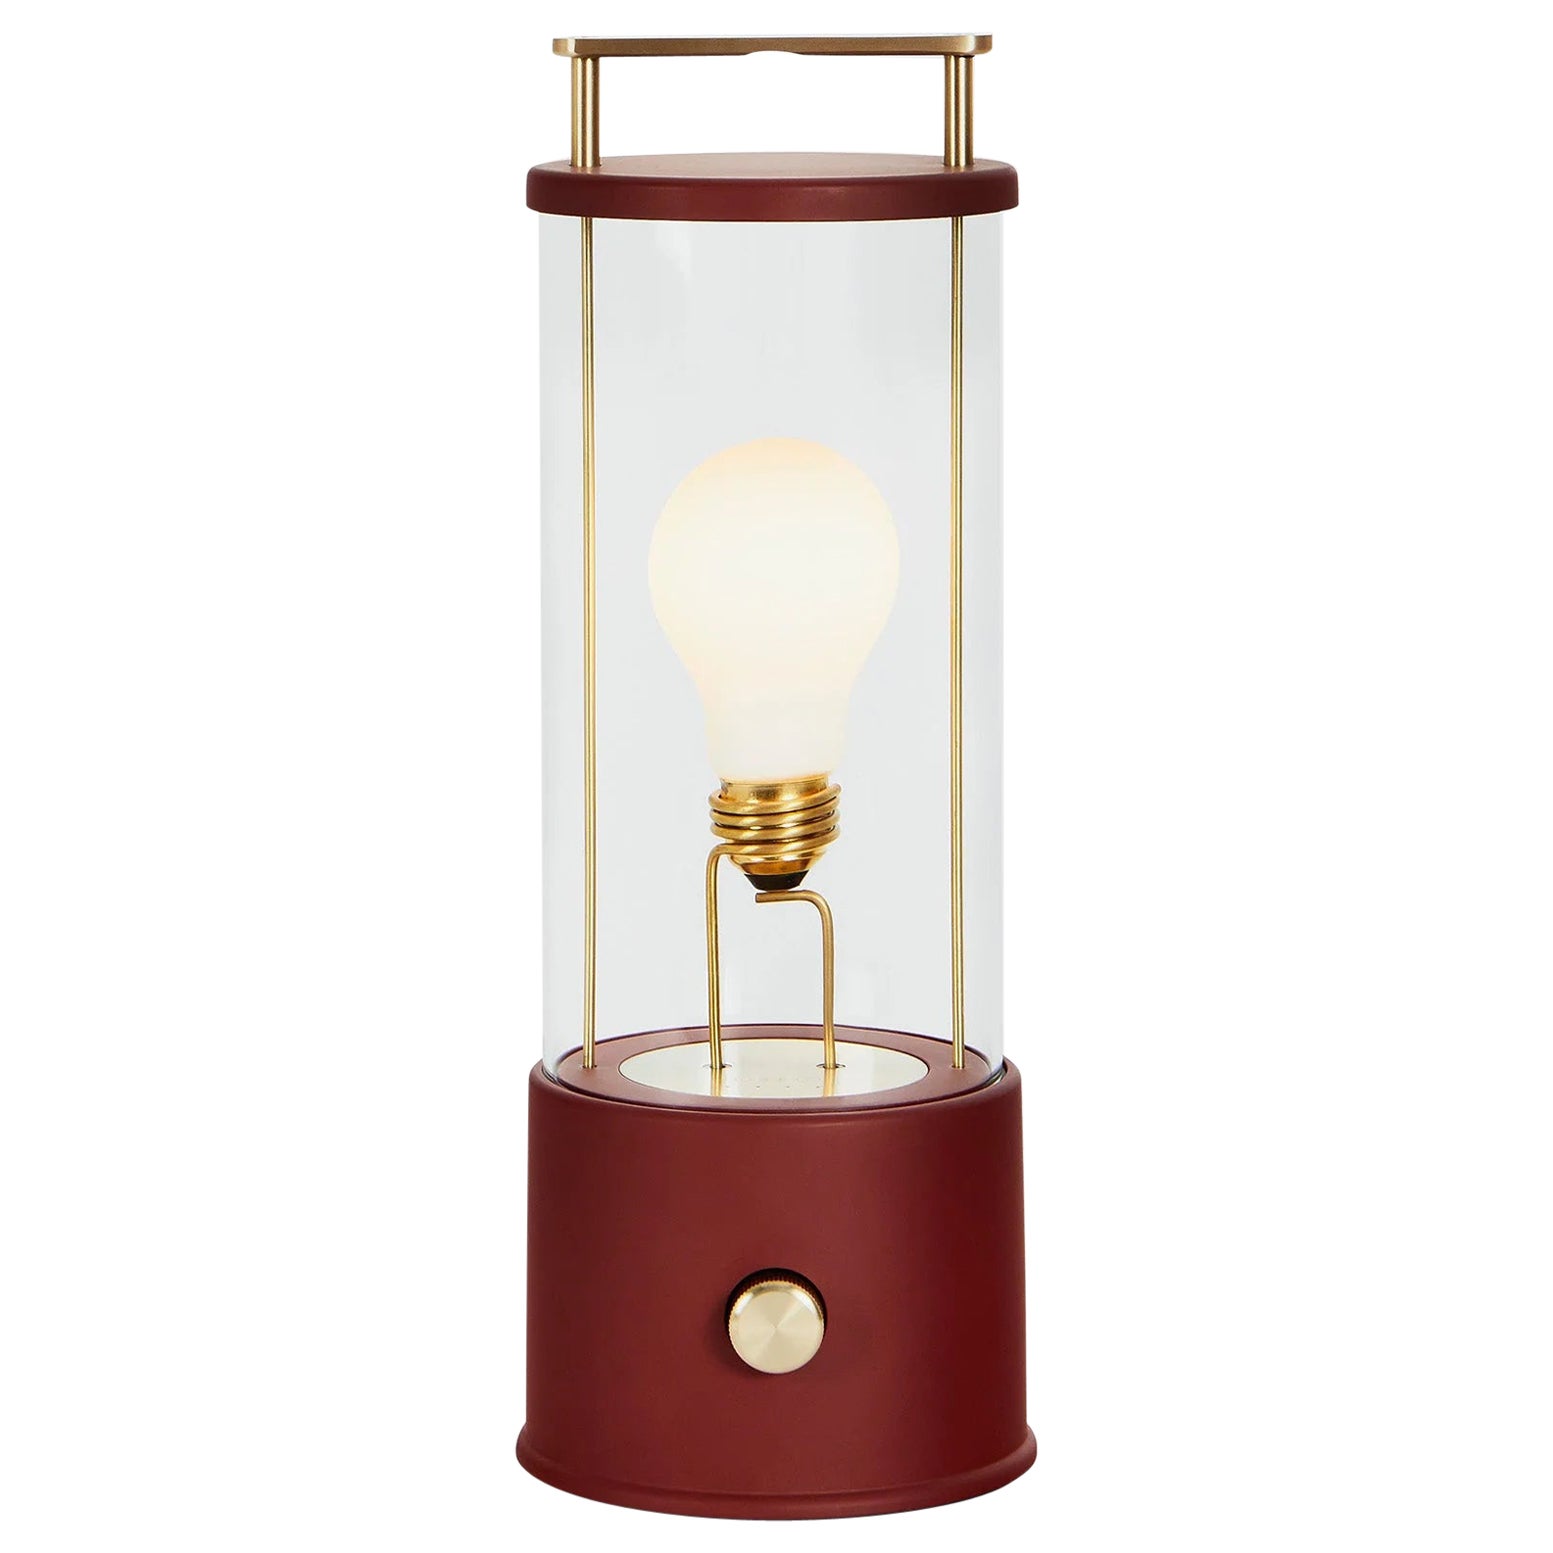 'The Muse' Portable Lamp by Farrow & Ball x Tala in Pomona Red For Sale